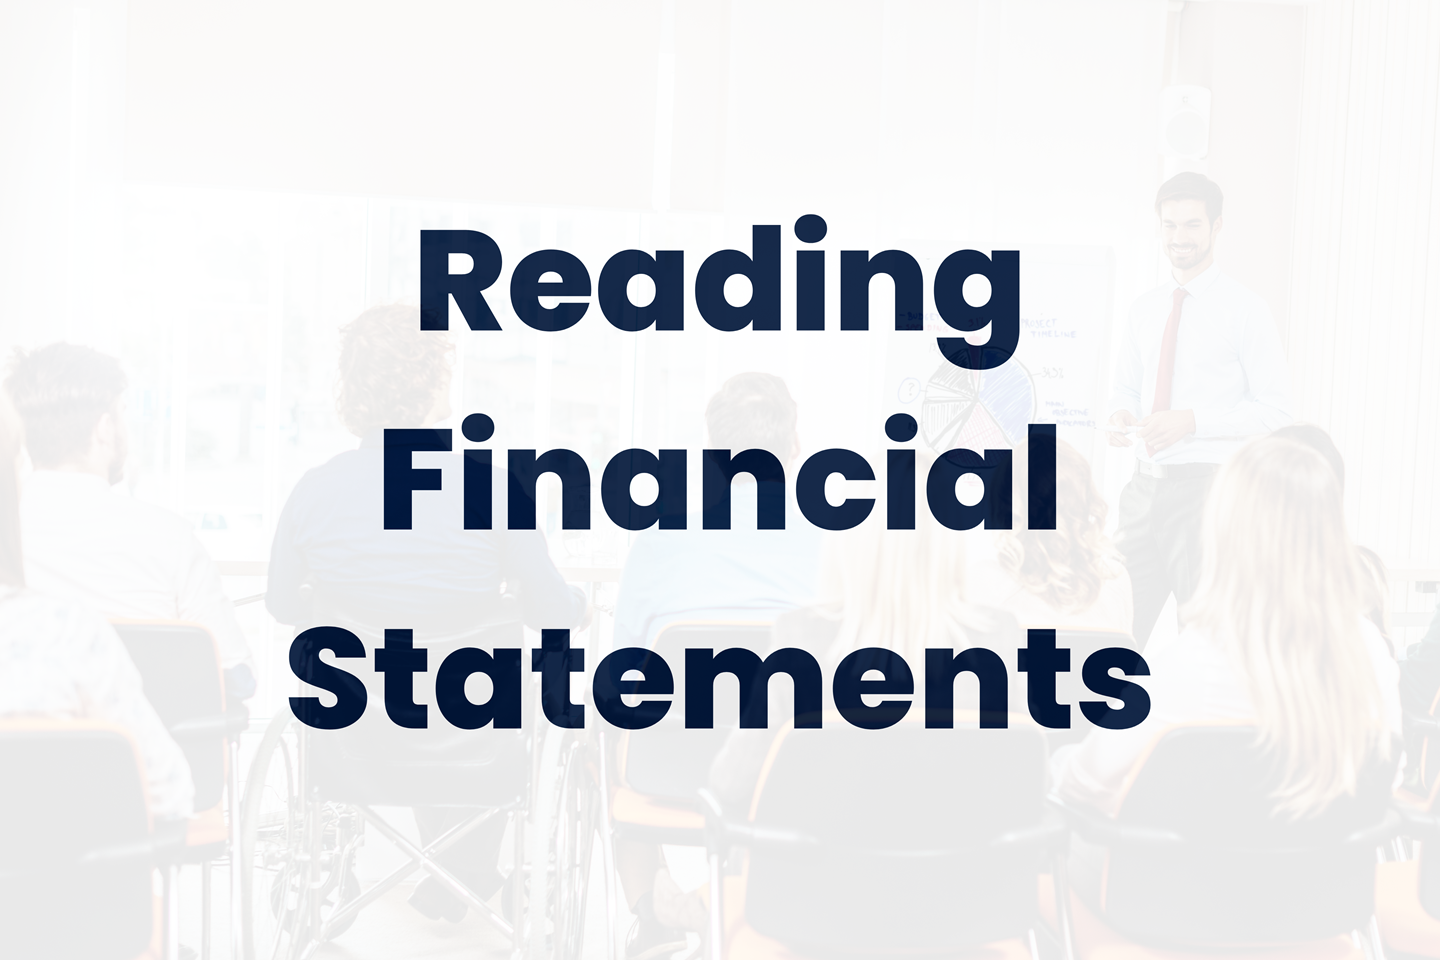 Reading Financial Statements text